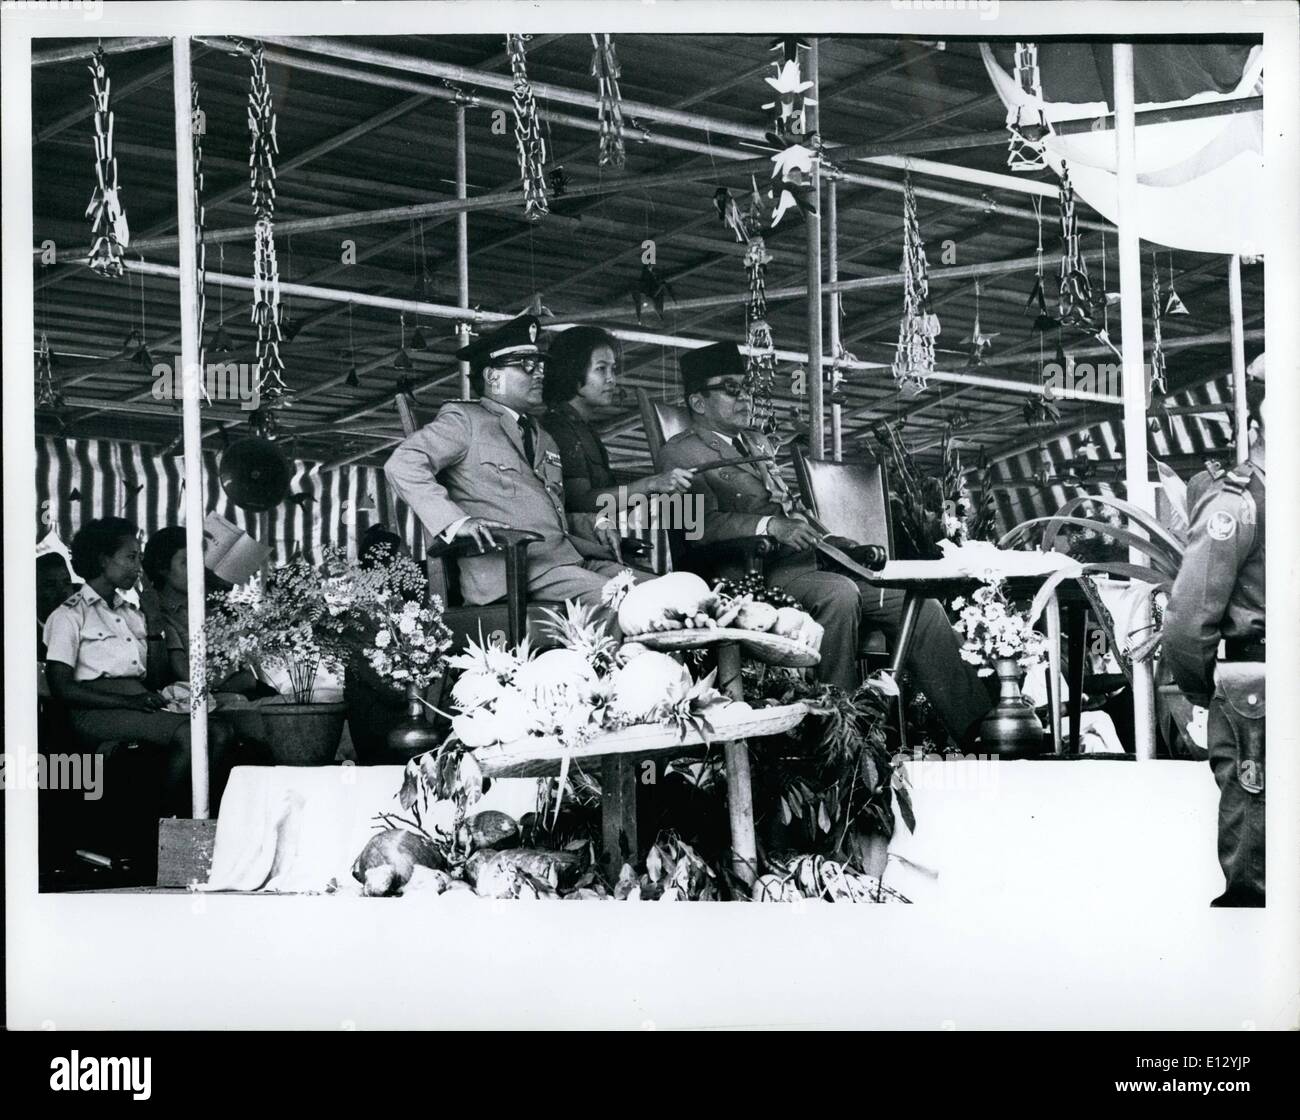 Feb. 25, 2012 - Sukarno, right, during ceremony laying cornerstone for new campus of Indonesian University, Djakarta, Indonesia, Sept. 26, 1965. Military aide center, fans Sukarno. Man on left in Uniform in Minister of Higher education B General (Ay) Professor Dr. Starif Thajeb (replaced on Feb. 22, 1966 by Dr. Johannes Leimena M   he is also Deputy Prime Minister II) Stock Photo